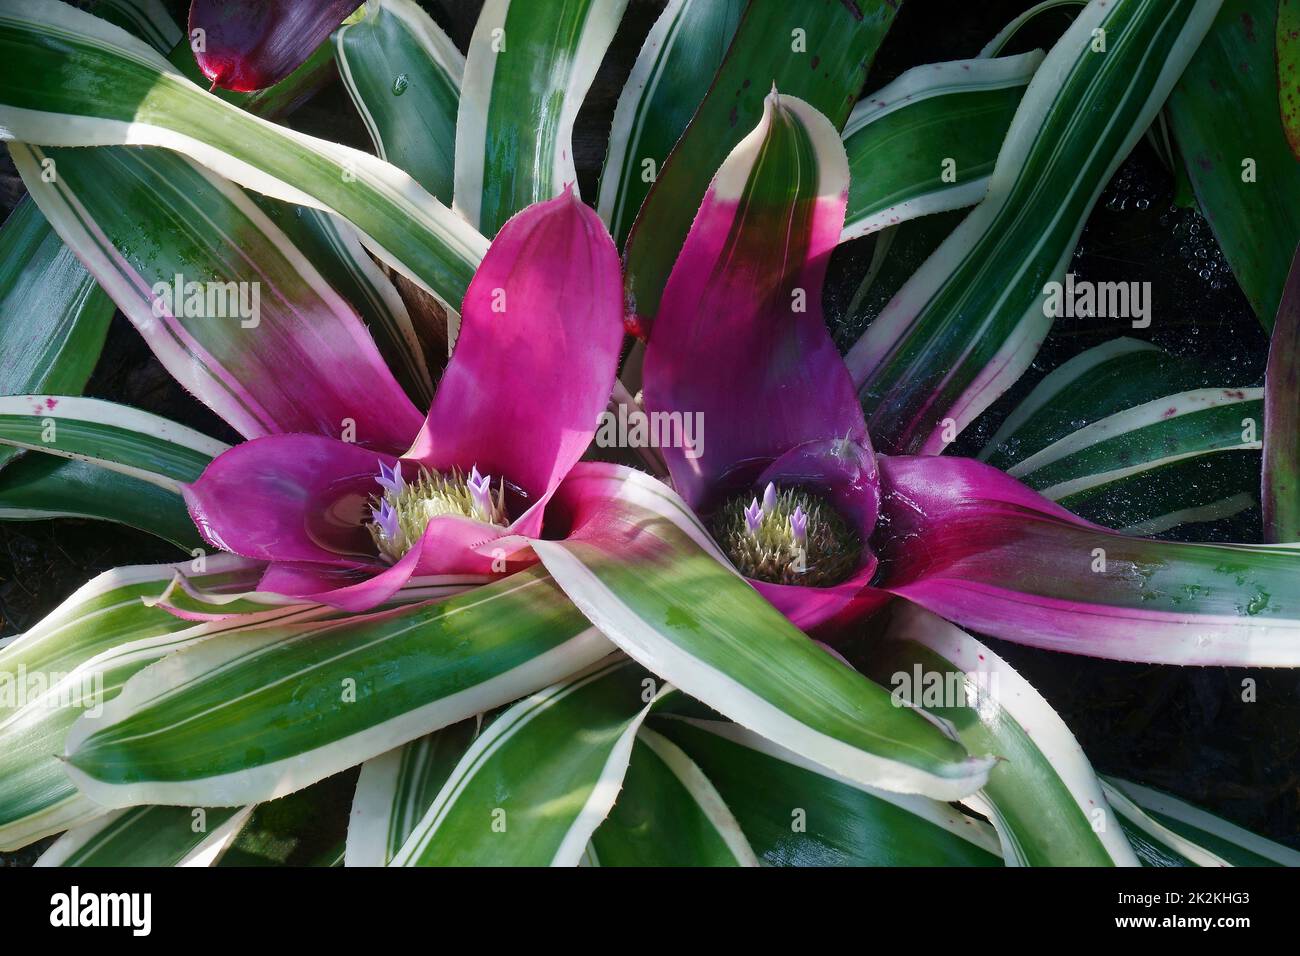 Close-up image of Blushing bromeliad plant in blossom Stock Photo